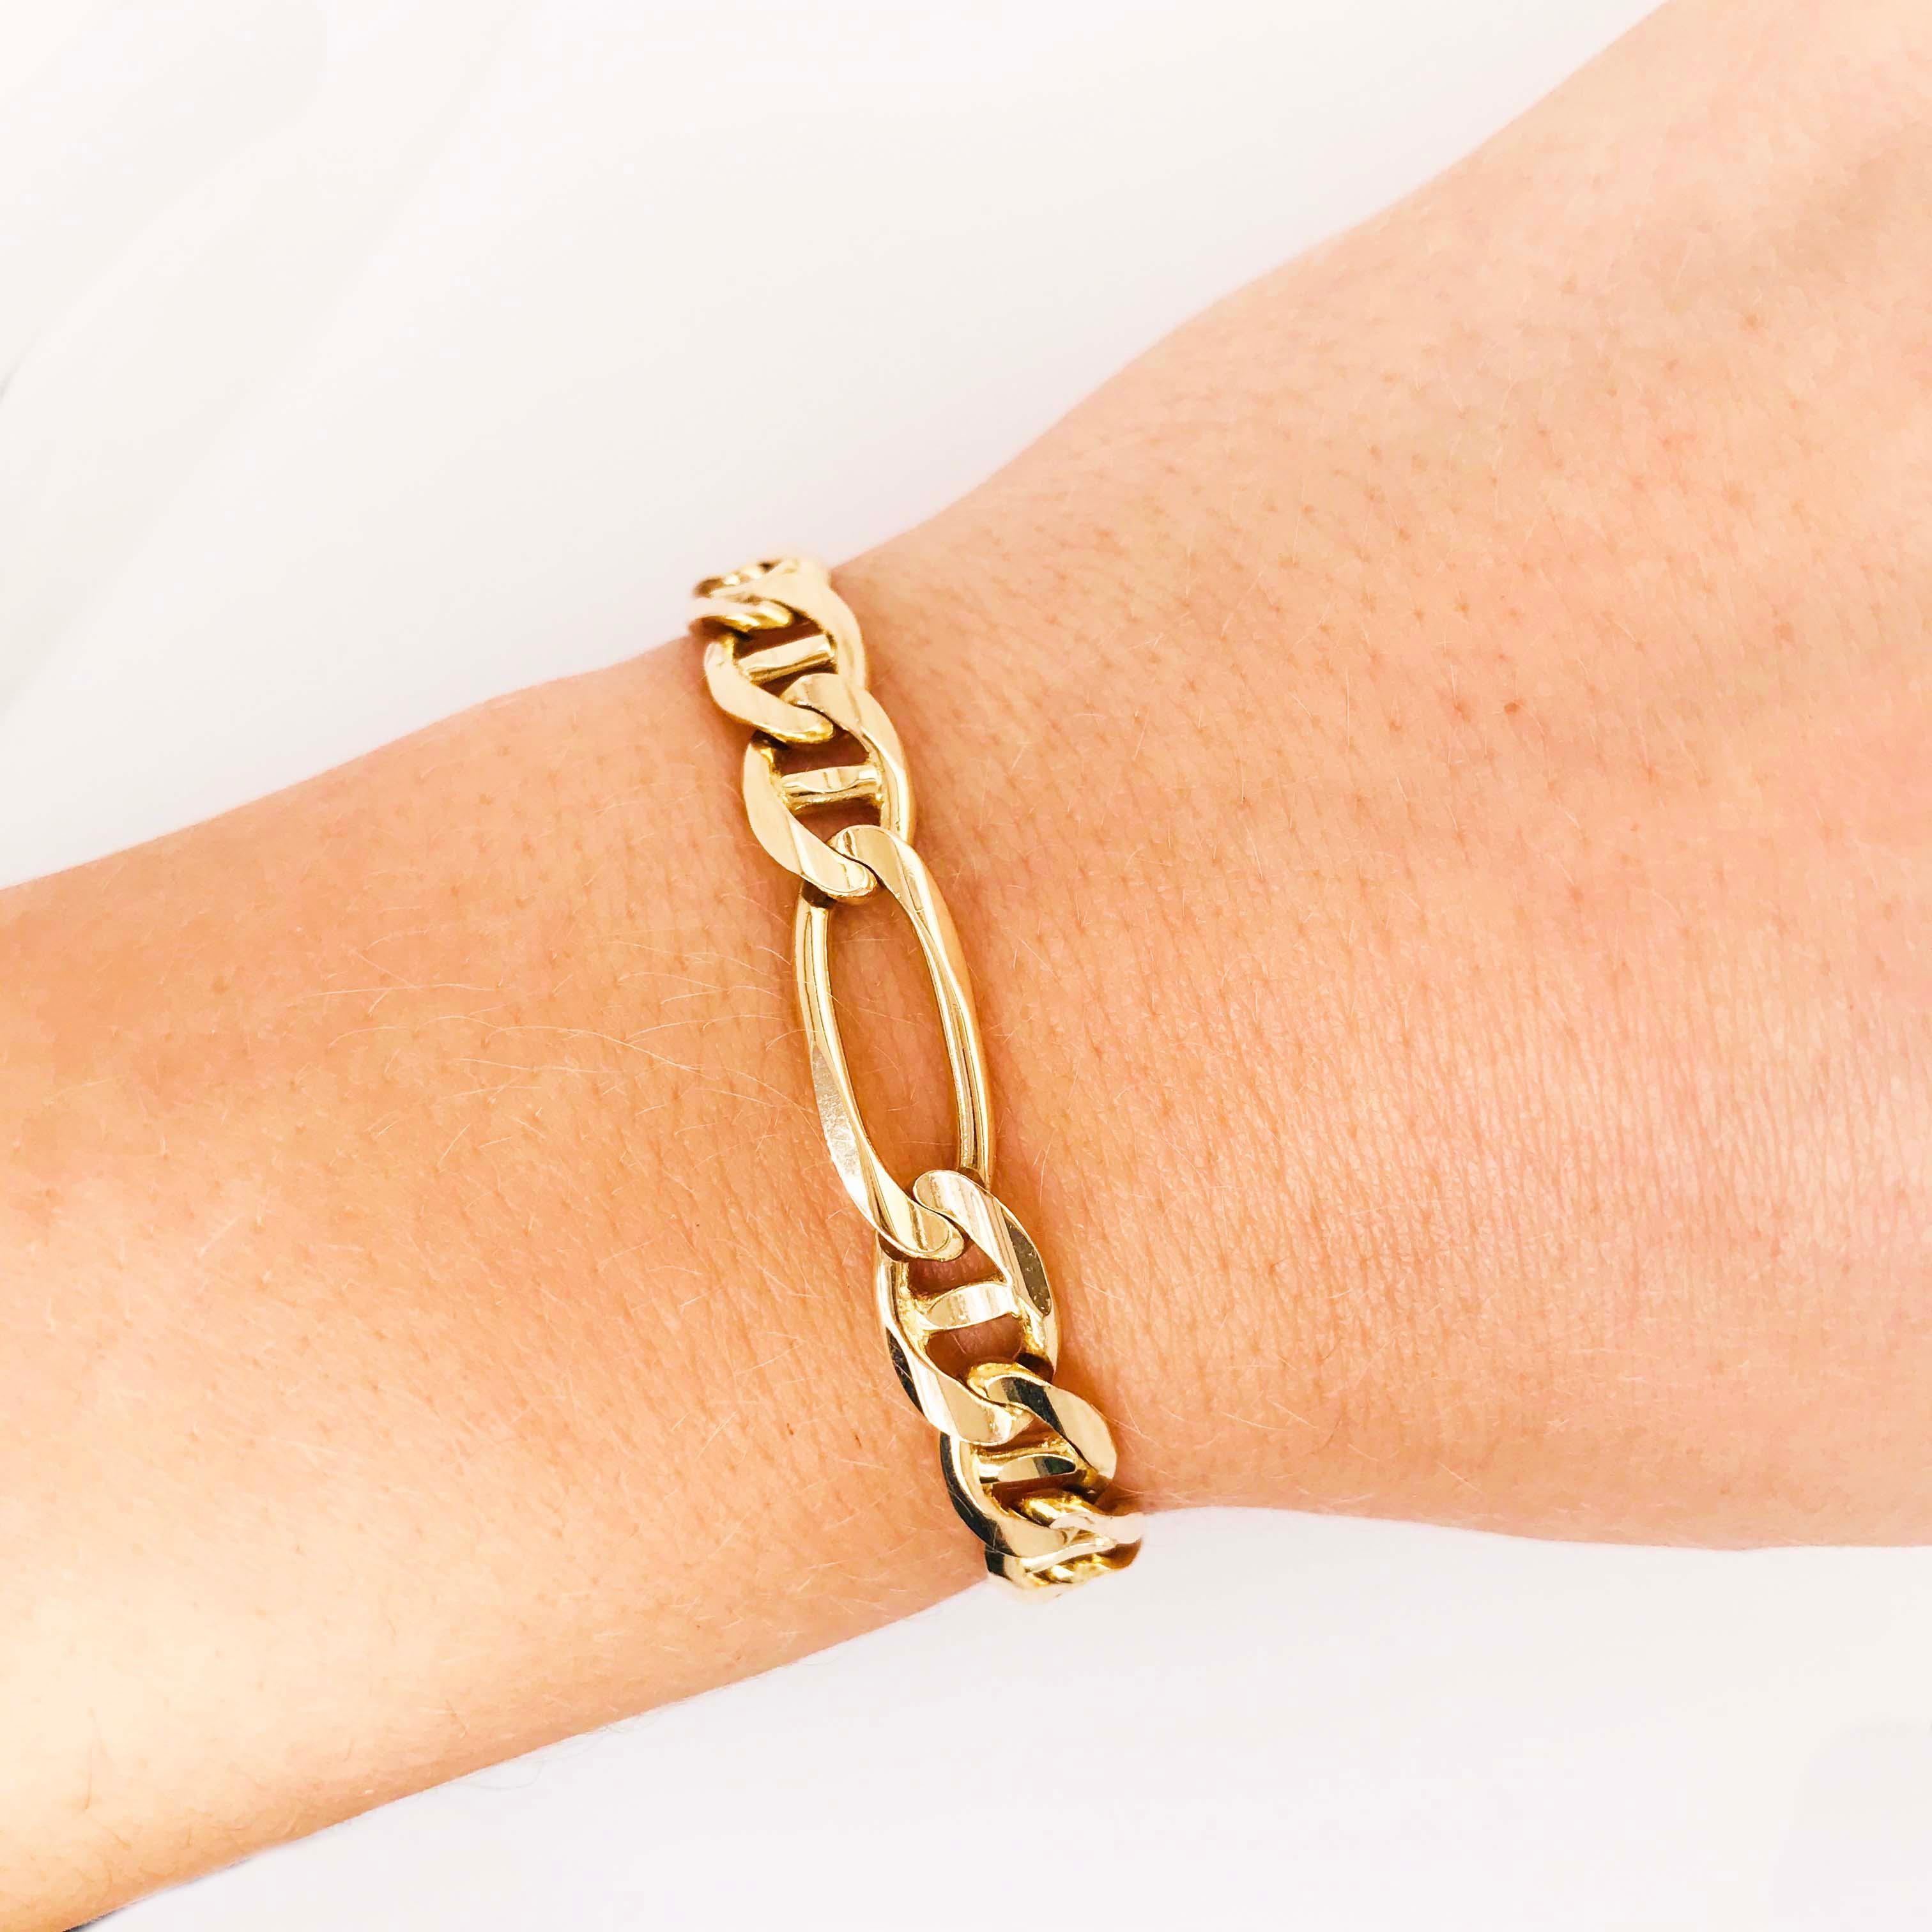 This 14kt gold,heavy, Figaro chain link bracelet is a staple in fashion chain jewelry! The Italian made Figaro chain bracelet is a handmade piece that was created and crafted in Italy. Italy is home to the best chain craftsmen. This heavy chain is